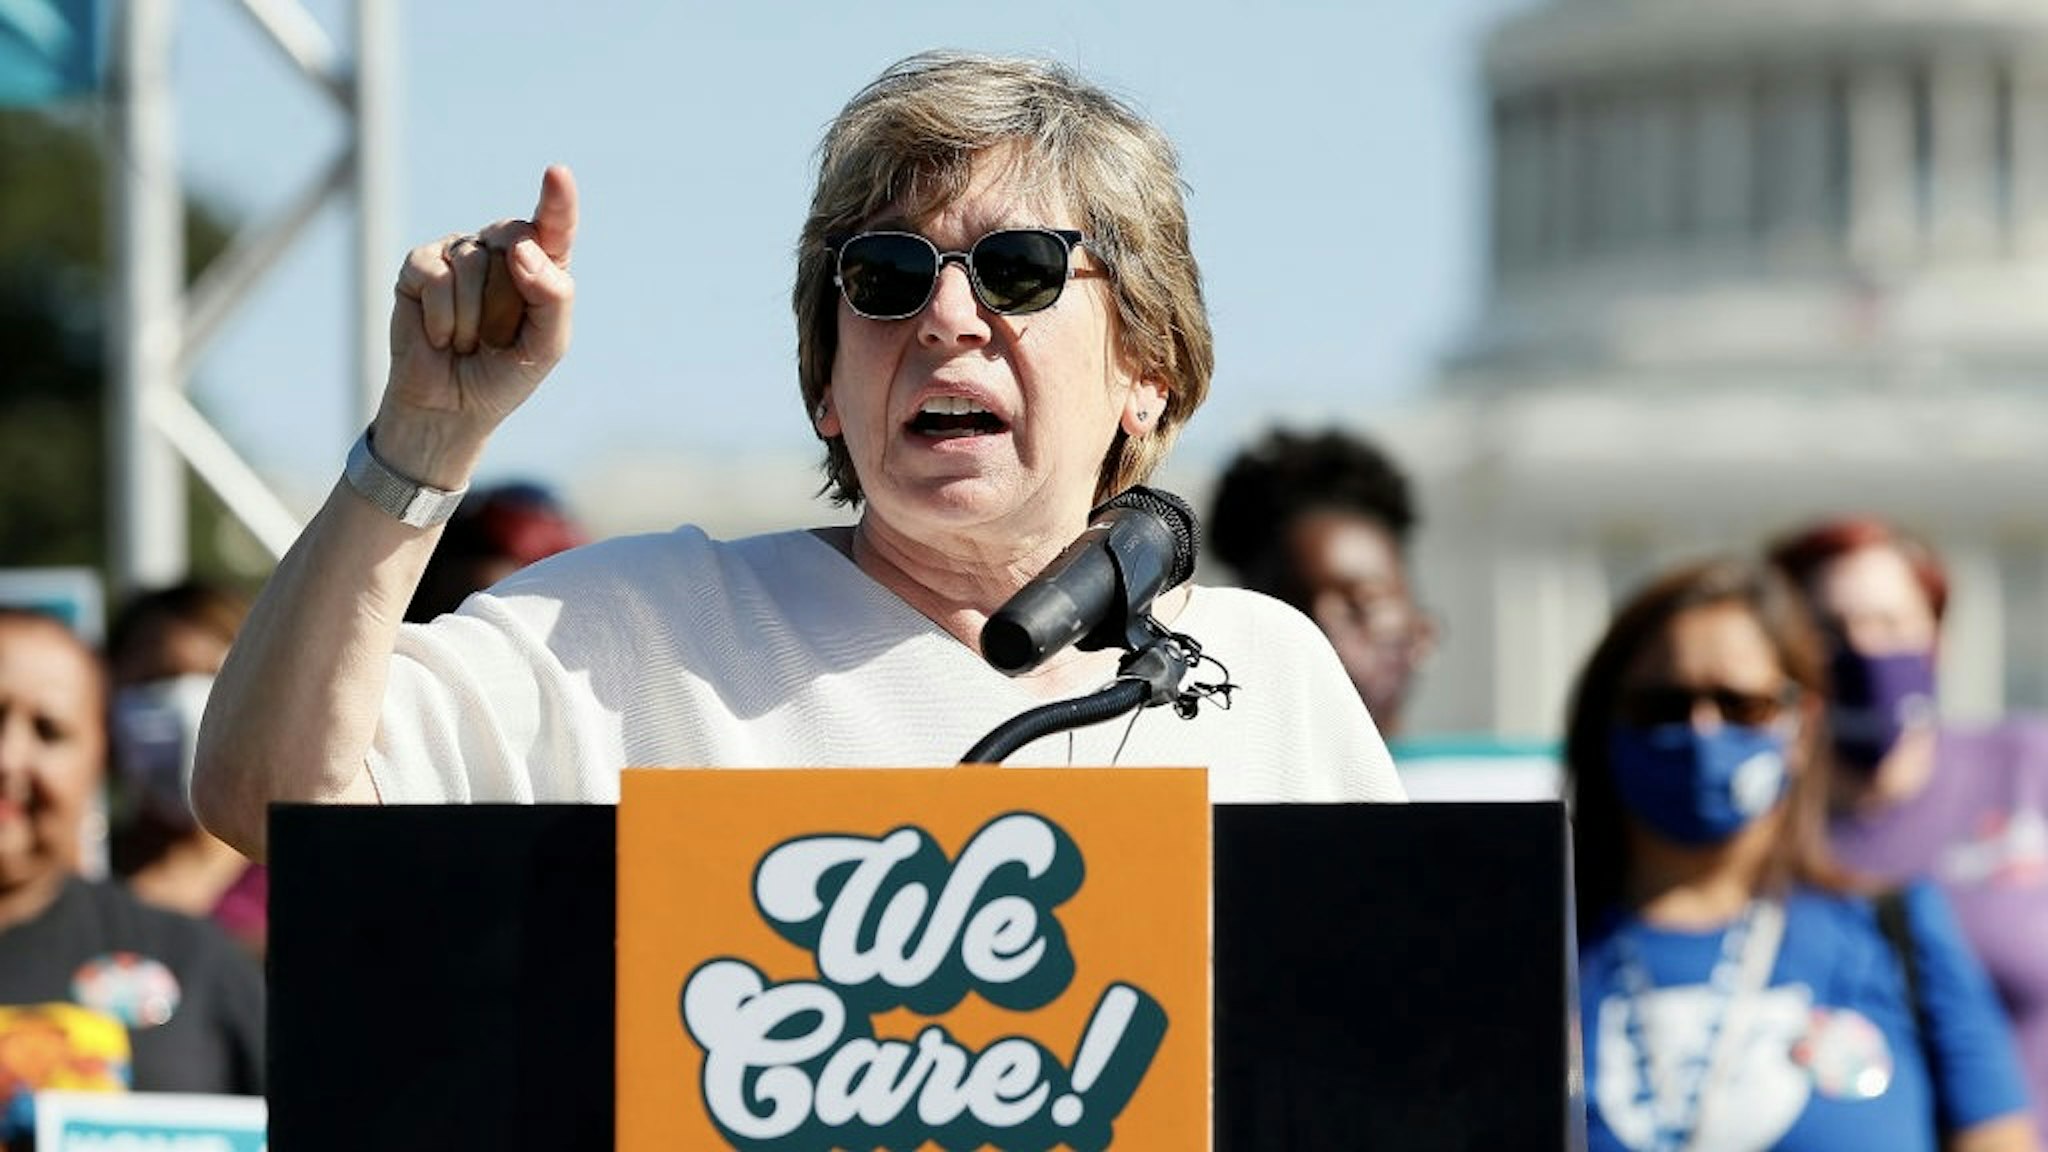 PowerUp & Build Back Better With Care WASHINGTON, DC - OCTOBER 21: Randi Weingarten, president of the American Federation of Teachers, along with members of Congress, parents and caregiving advocates hold a press conference supporting Build Back Better investments in home care, childcare, paid leave and expanded CTC payments in front of the U.S. Capitol Building on October 21, 2021 in Washington, DC. (Photo by Paul Morigi/Getty Images for MomsRising Together) Paul Morigi / Stringer